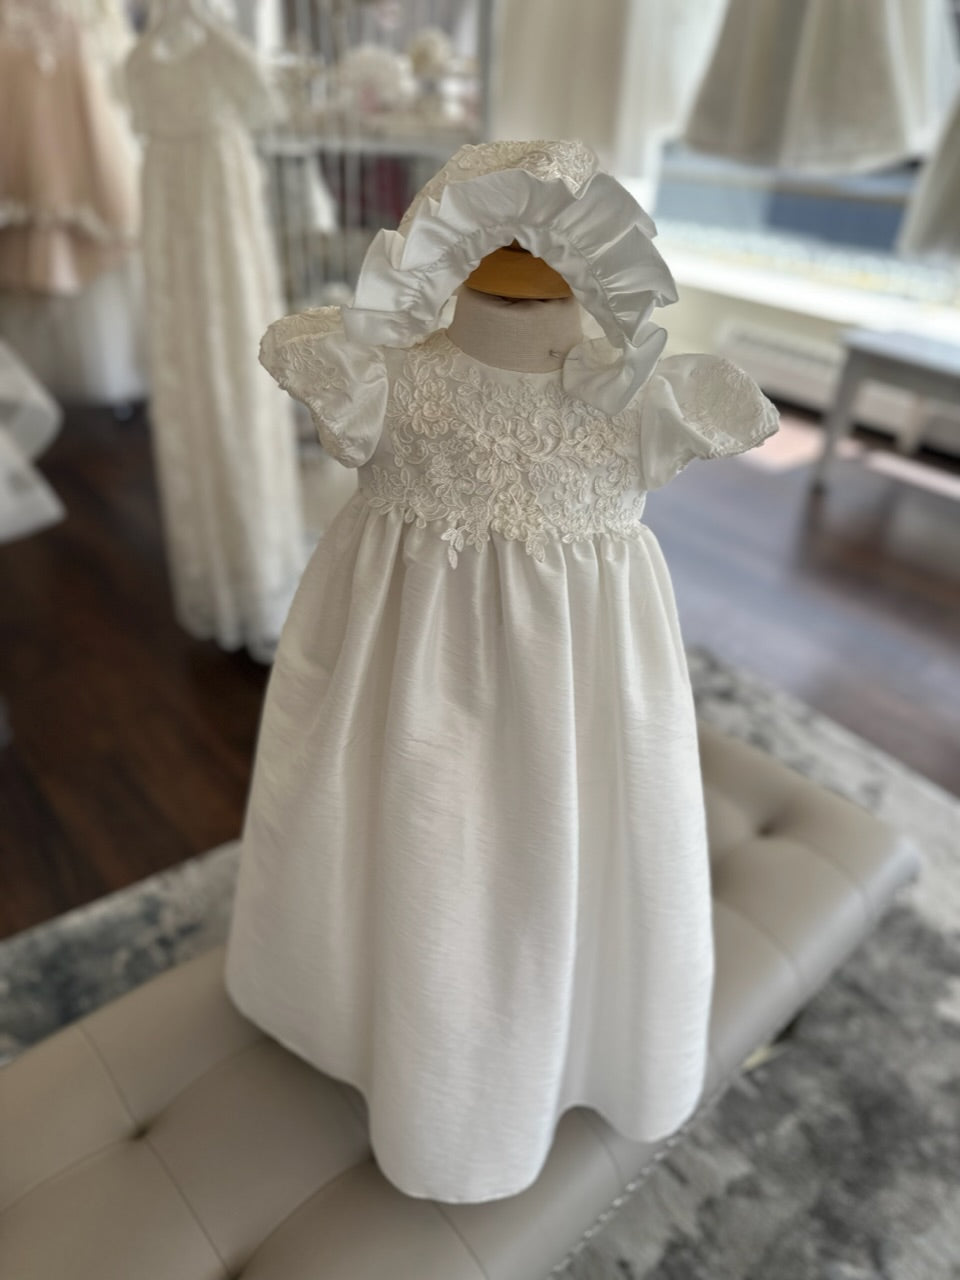 MACIS SAMPLE CLEARANCE CHRISTENING GOWN 3 MTHS